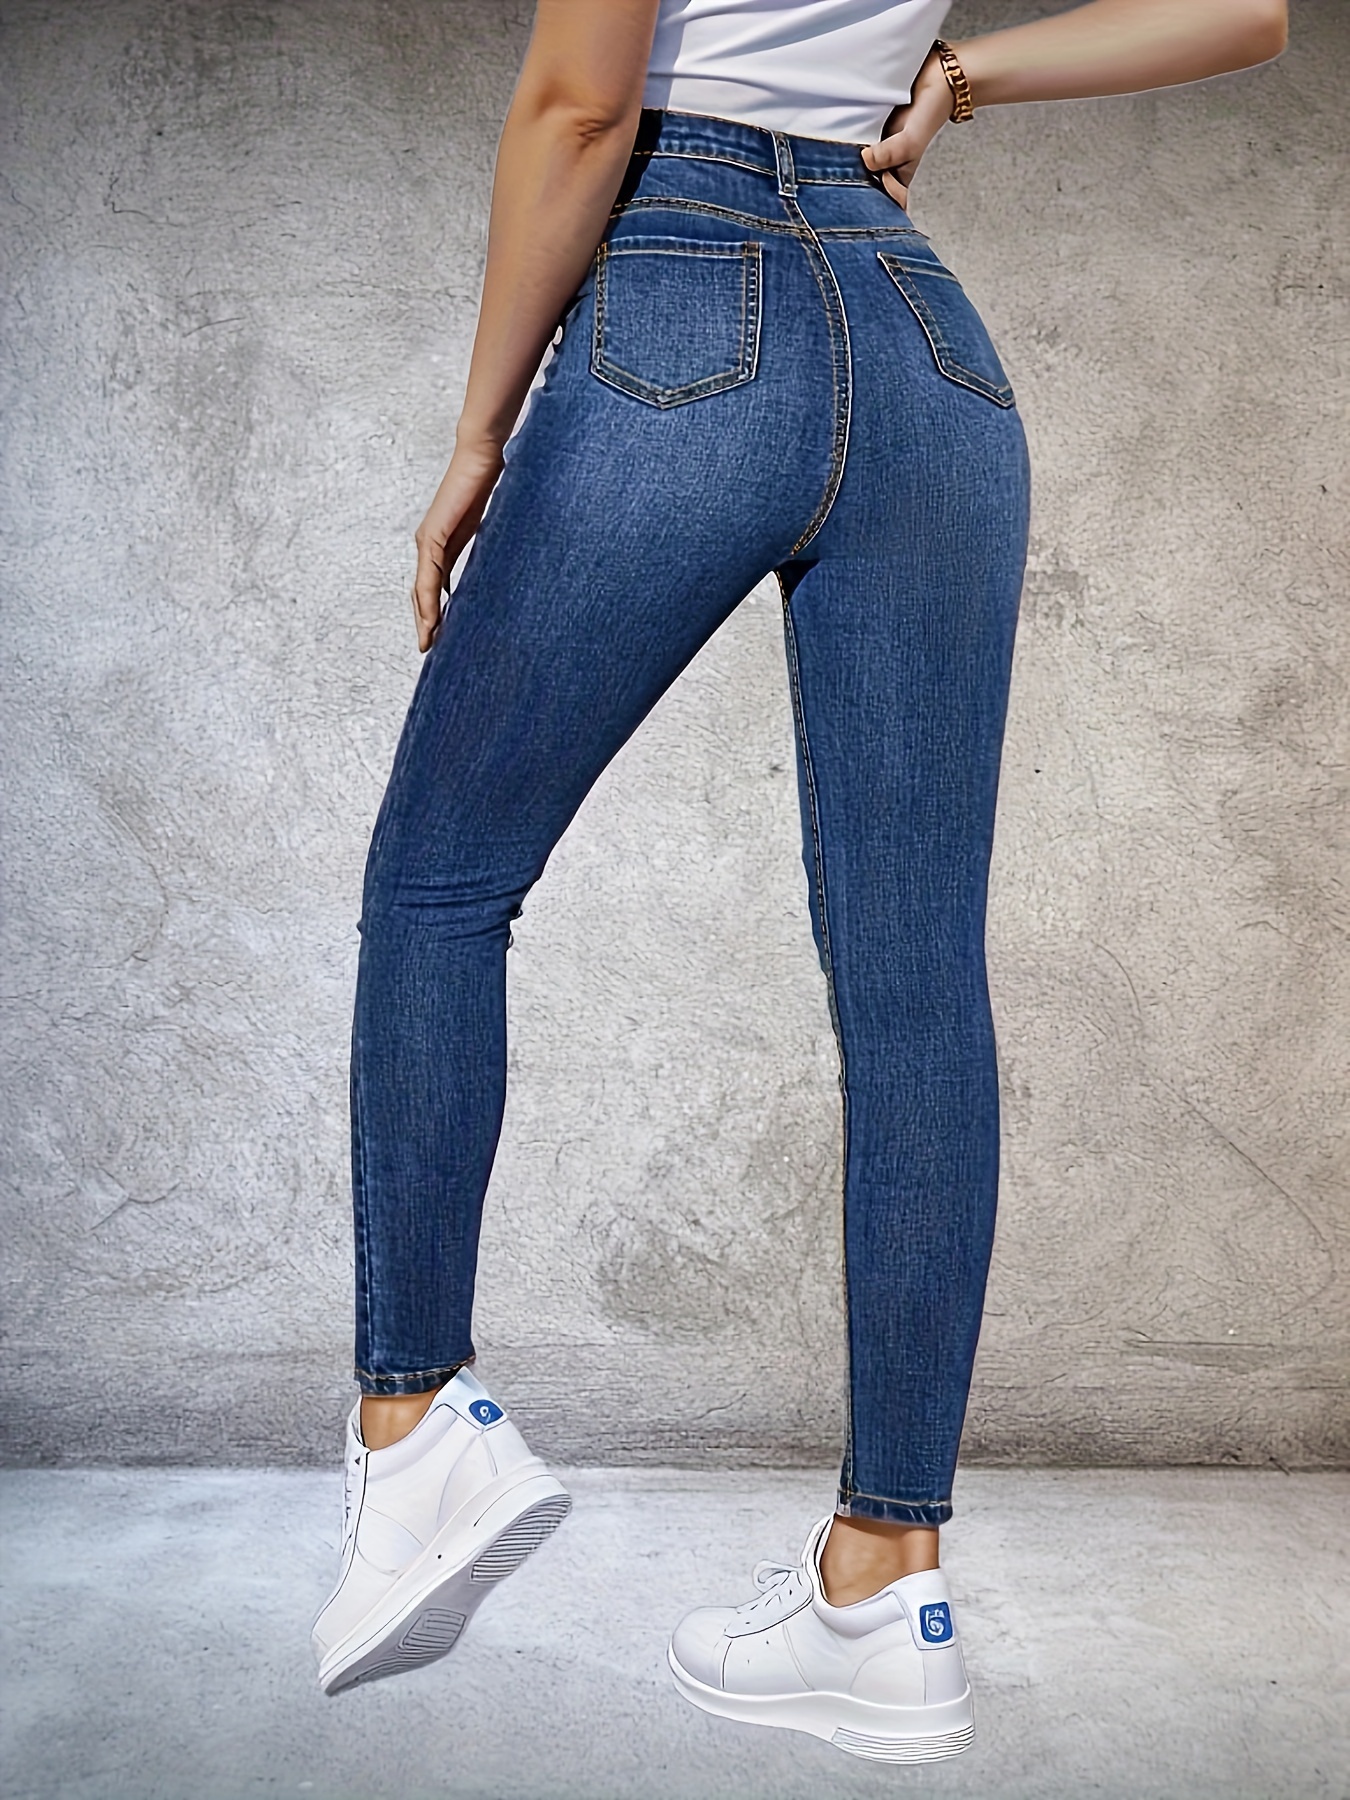 Ripped Holes Casual Skinny Jeans, High Waist Slim Fit Chic Tight Jeans,  Women's Denim Jeans & Clothing